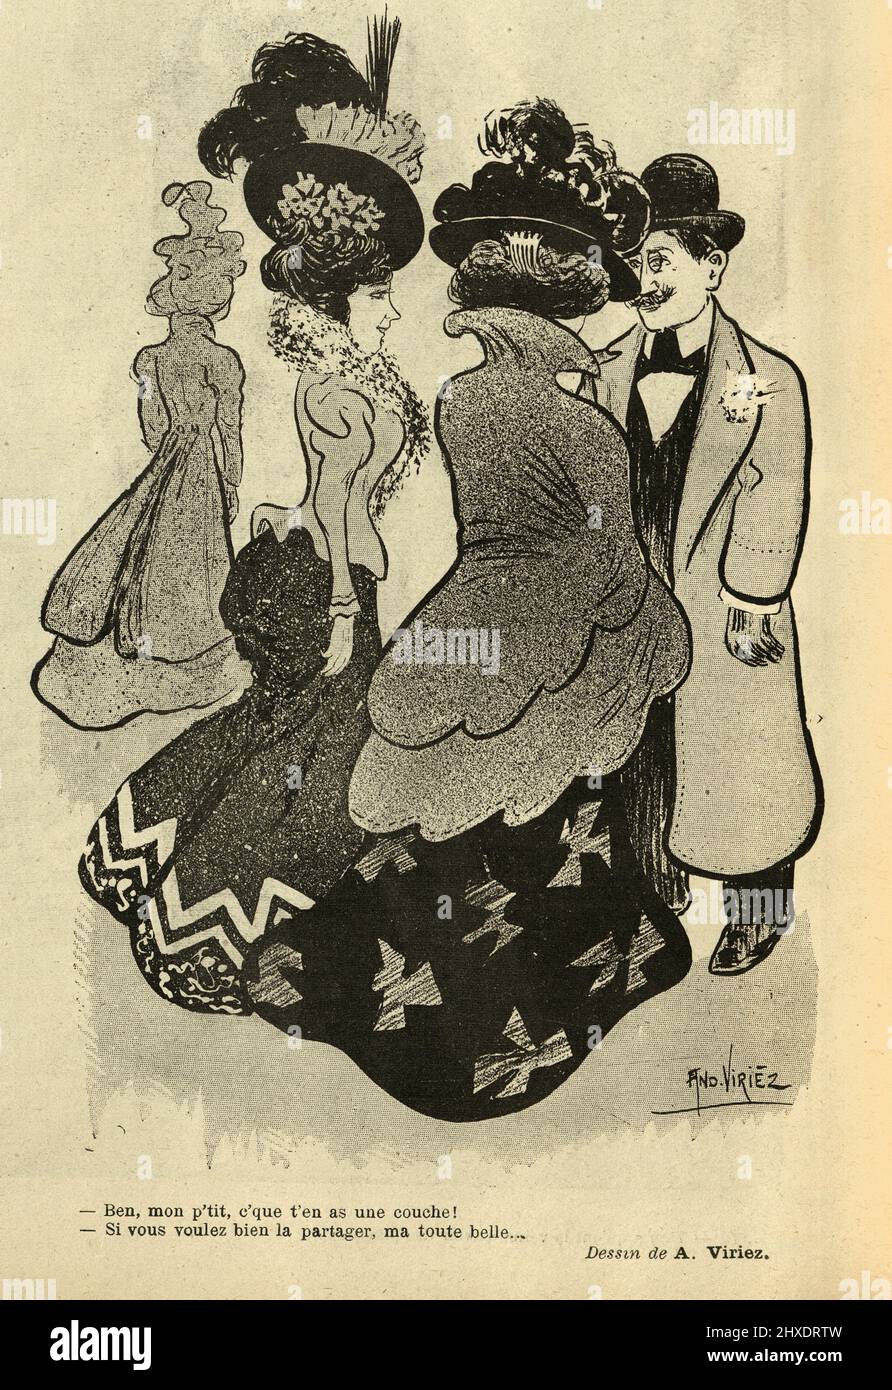 Vintage French cartoon, Man talking to two well dressed woman, 1890s, 19th Century. Ben, mon p'tit, c'que t'en as une couche ! Si vous voulez bien la partager, ma toute belle. Ben, my little one, that you have a layer! If you want to share it, my beautiful one Stock Photo